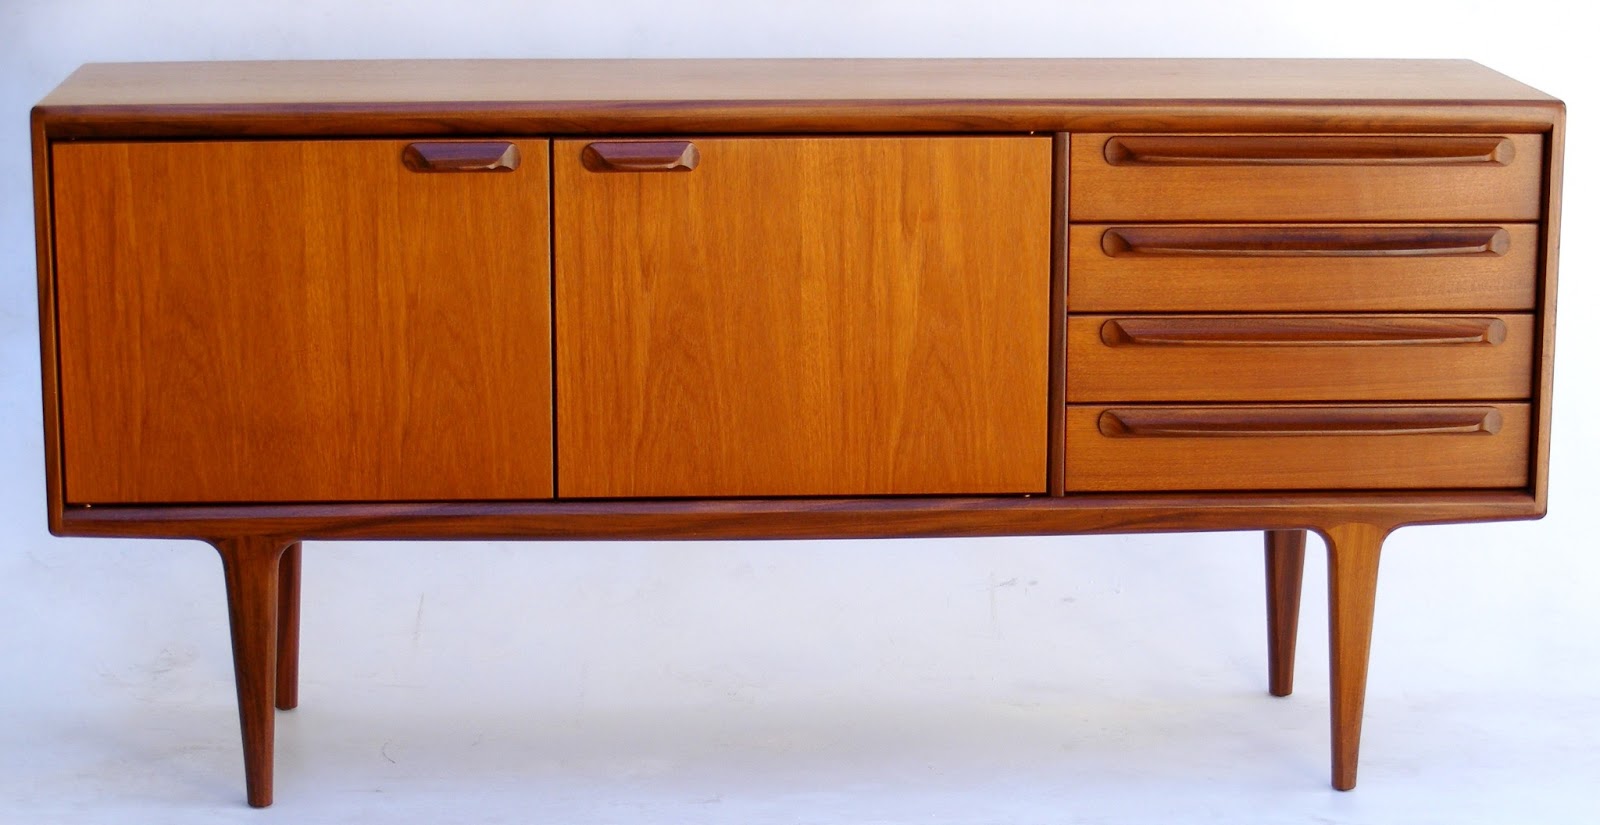 PIC 5A VAMP YOUNGER SIDEBOARD JPG